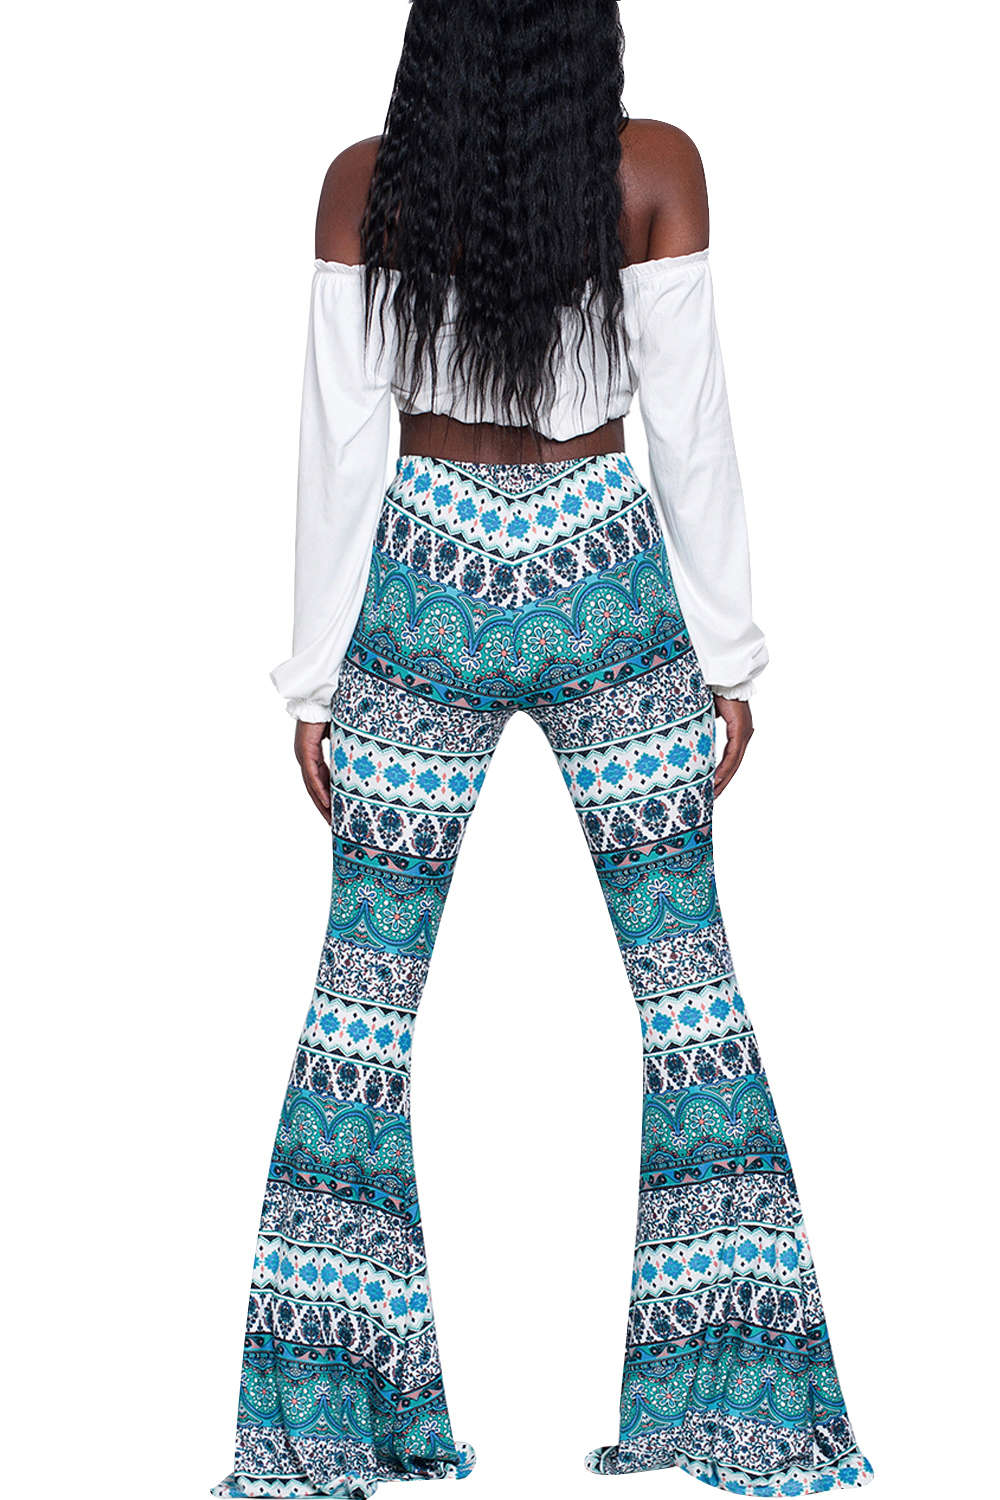 Iyasson Women Casual Print Stretchy Bell Bottom Flare  Skinny Pants High Waist Trousers